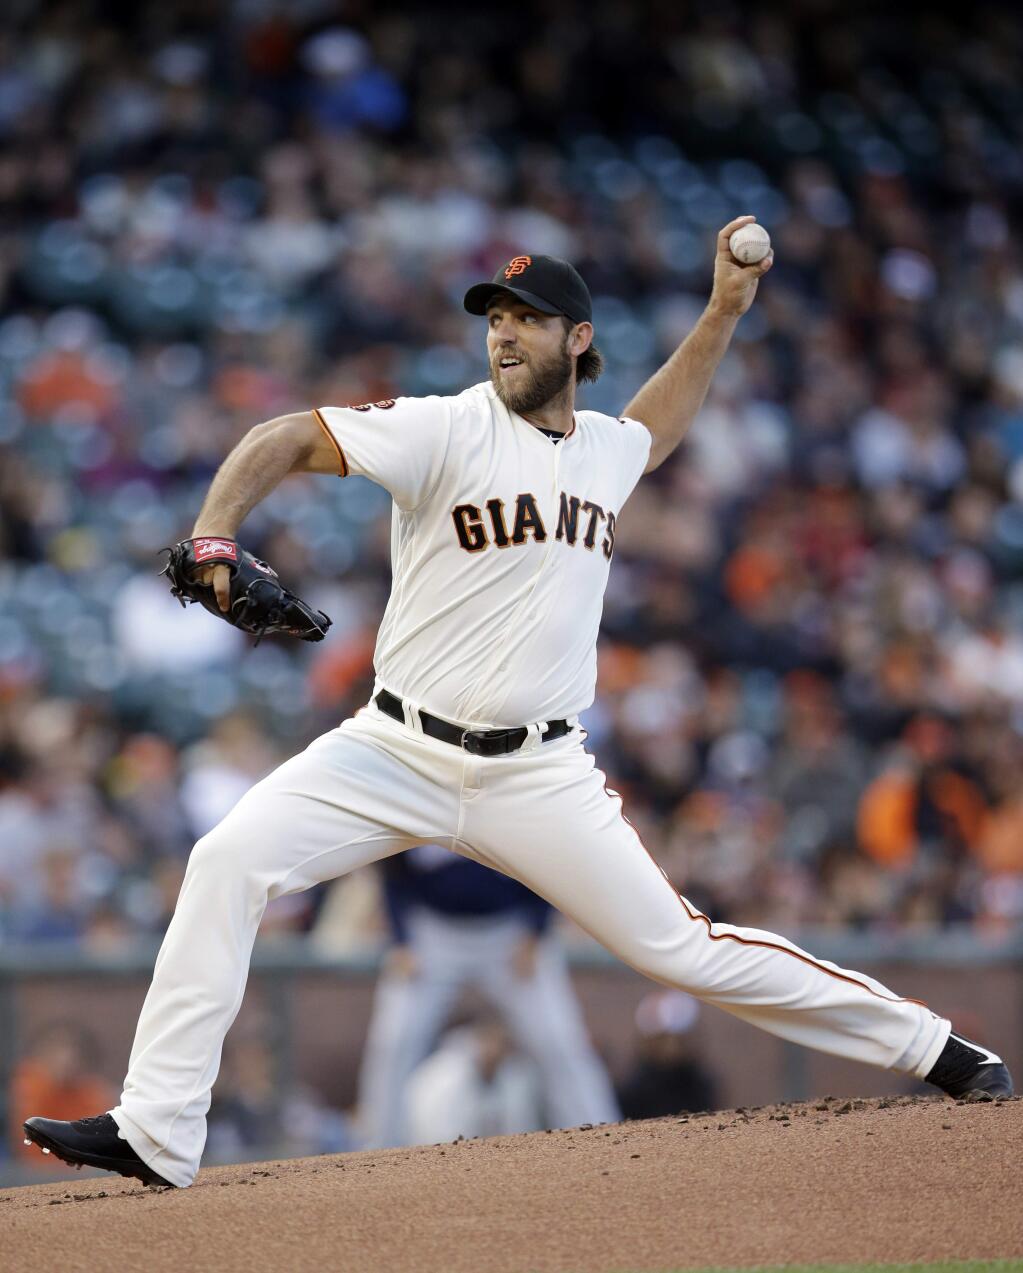 San Francisco Giants starting pitcher Madison Bumgarner throws to the Milwaukee Brewers during the first inning of a baseball game Tuesday, June 14, 2016, in San Francisco. (AP Photo/Marcio Jose Sanchez)